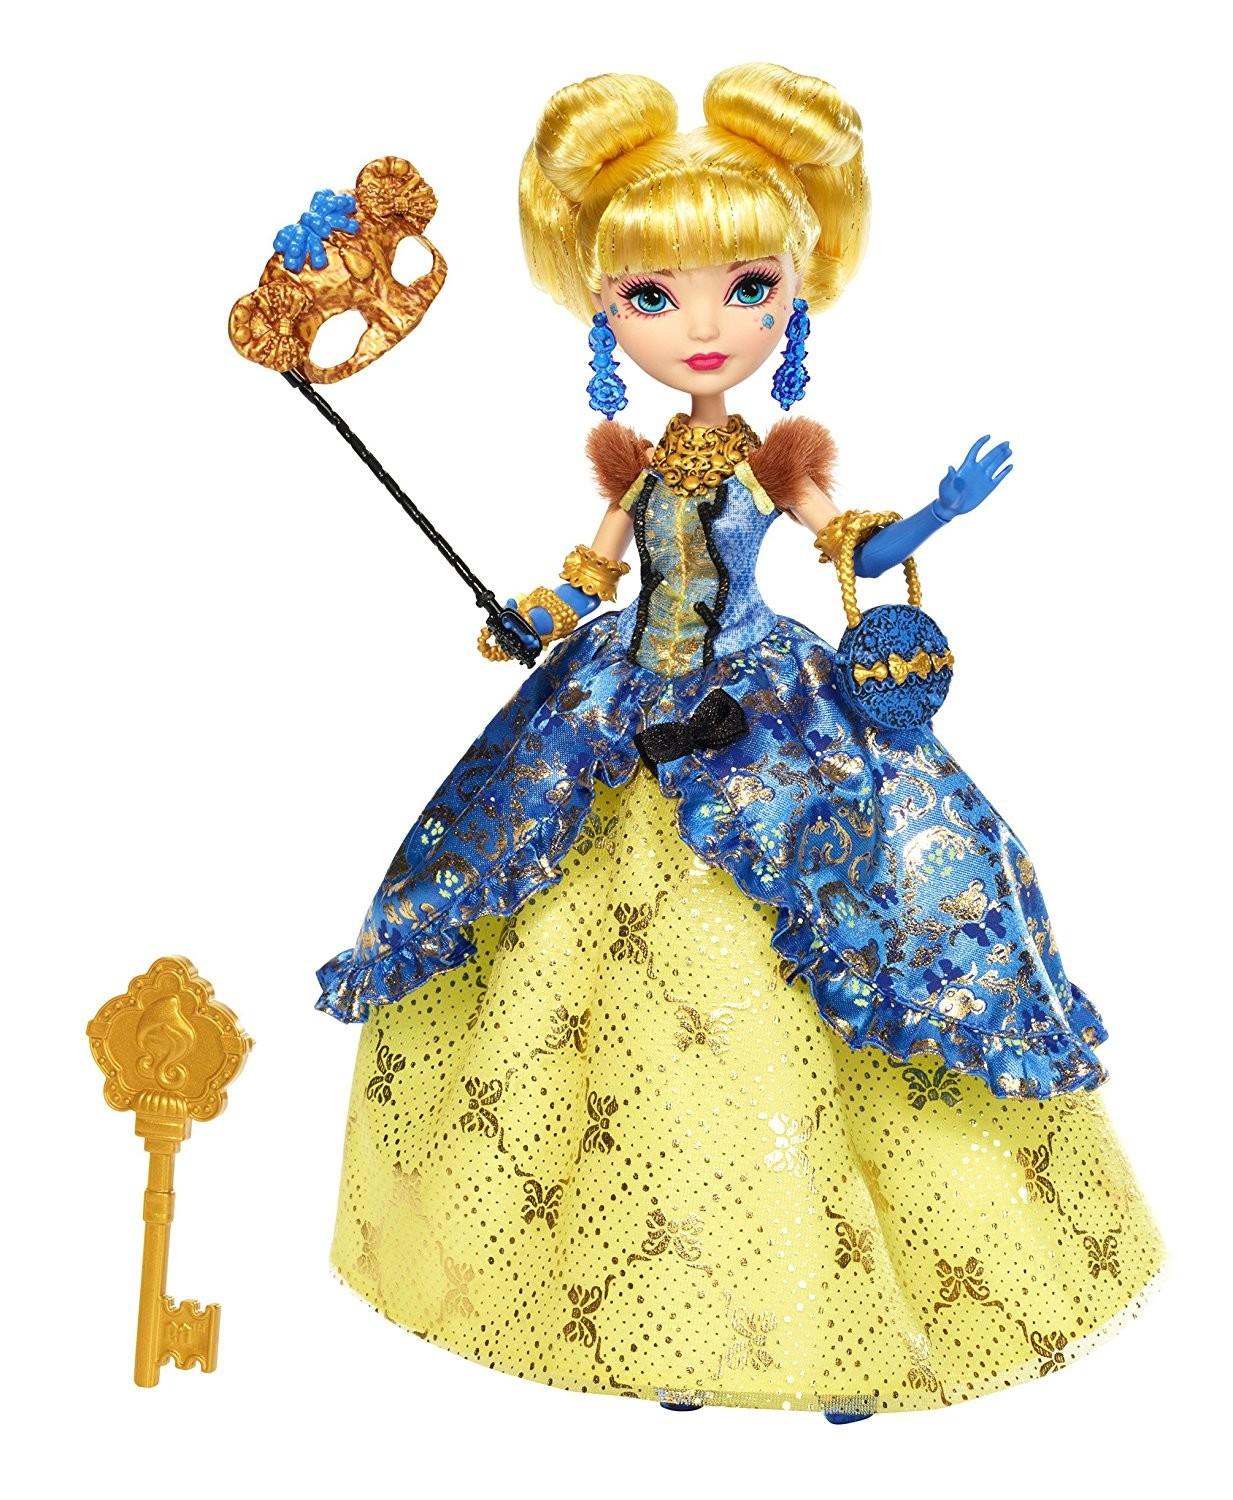 ever after high thronecoming apple white doll